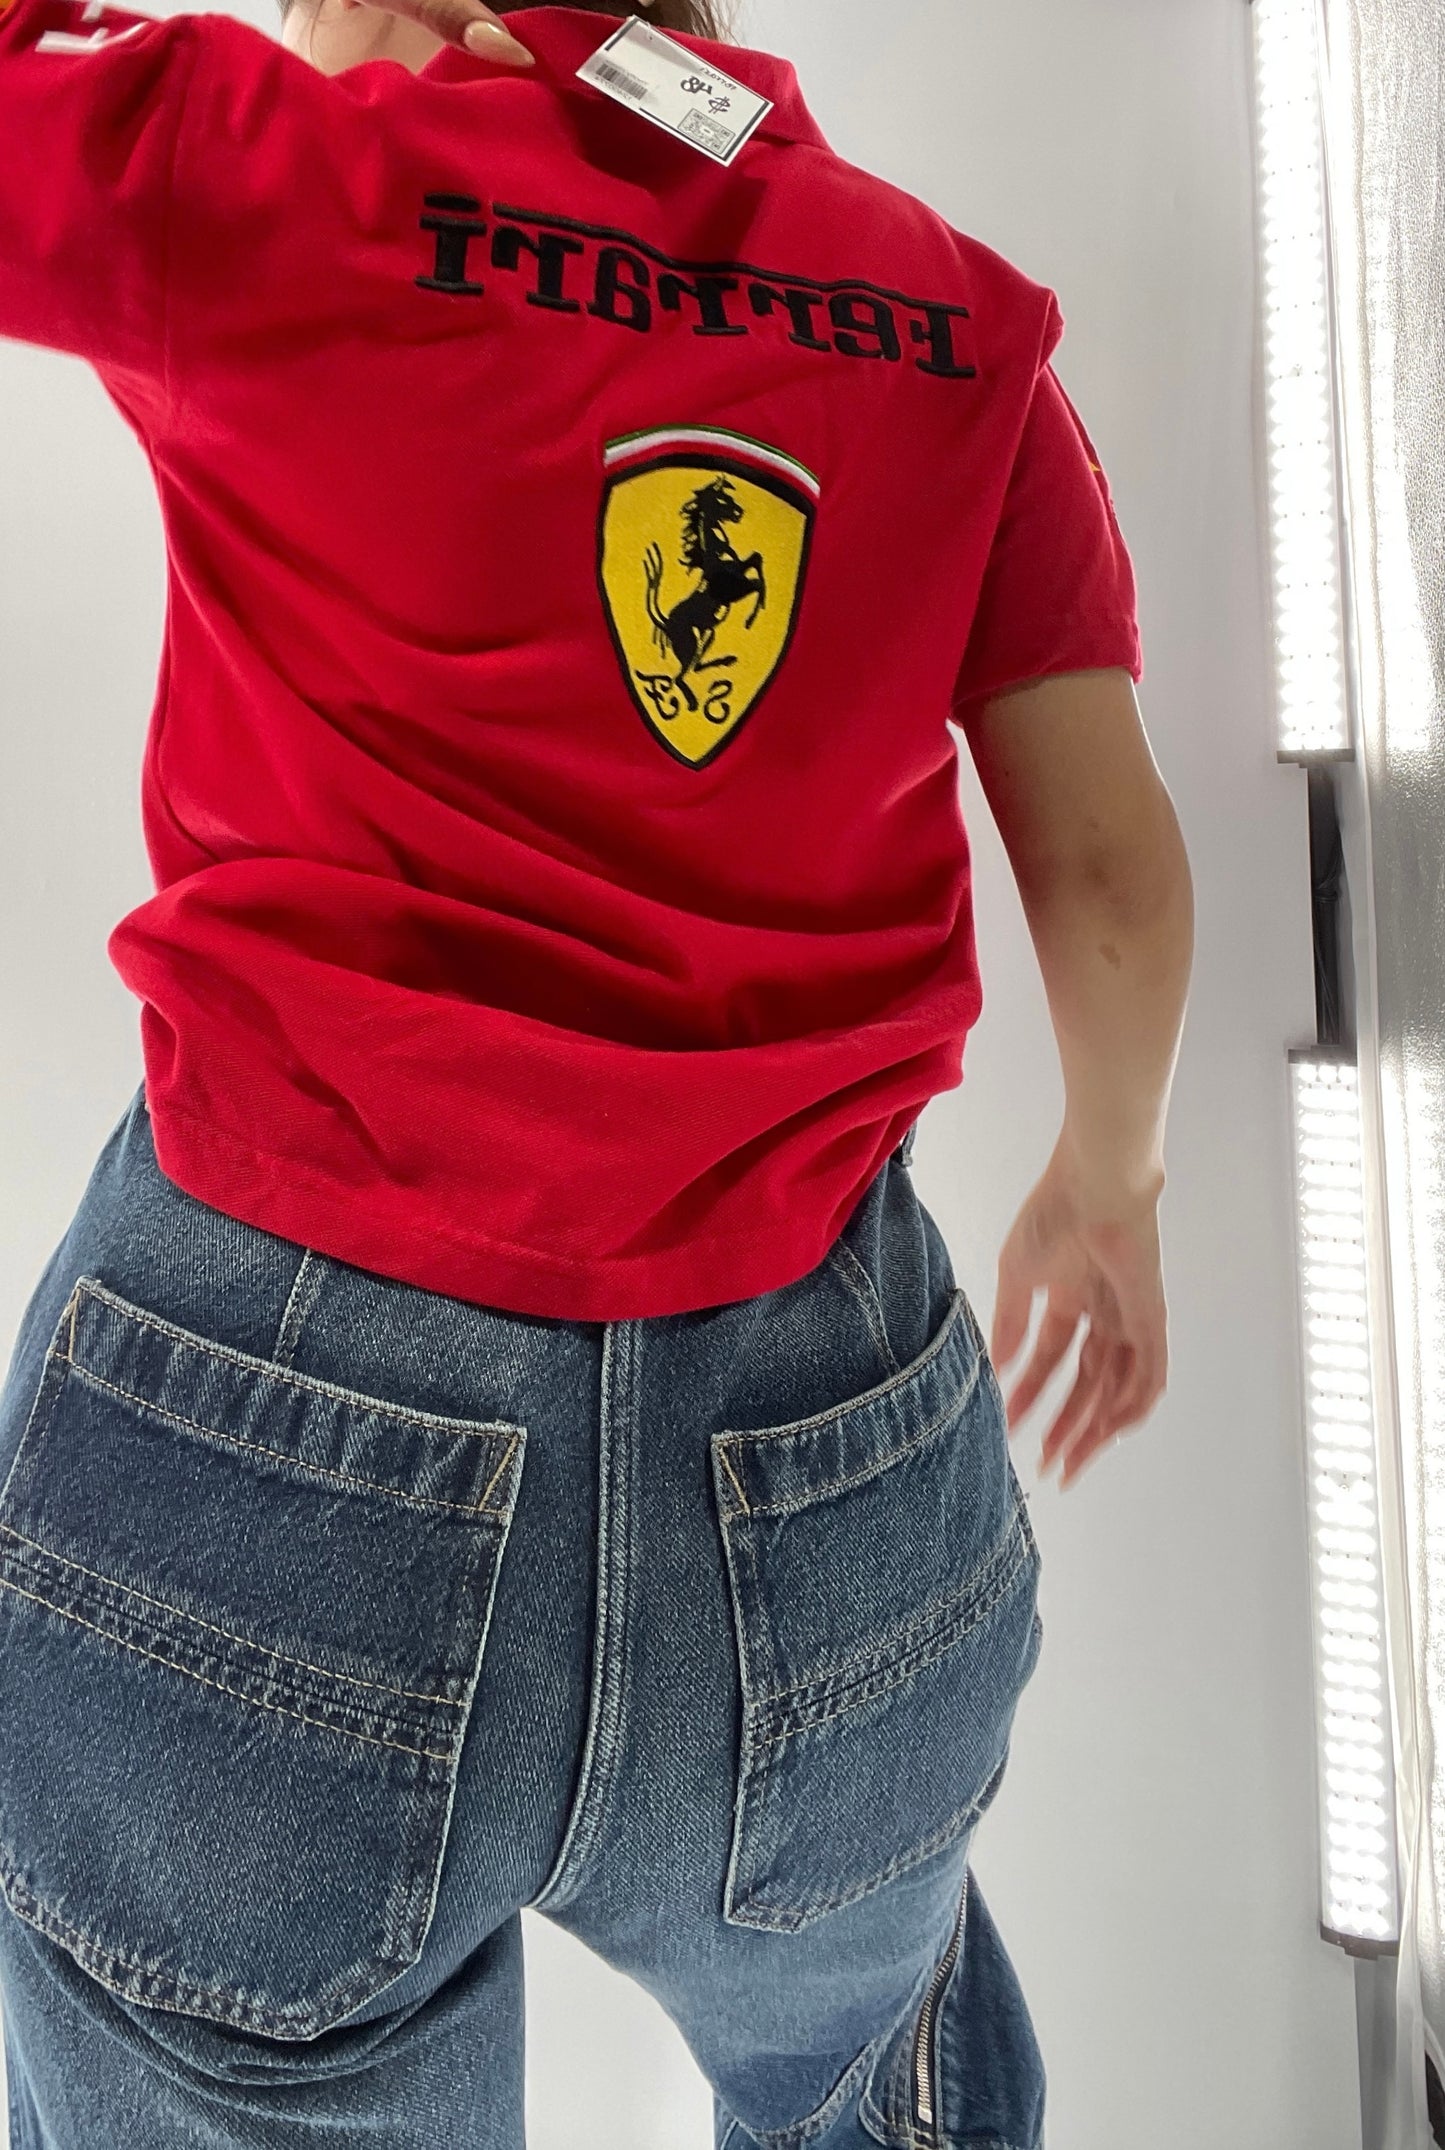 Vintage Red Ferrari Polo with Old School Logo Embroidery  (S)